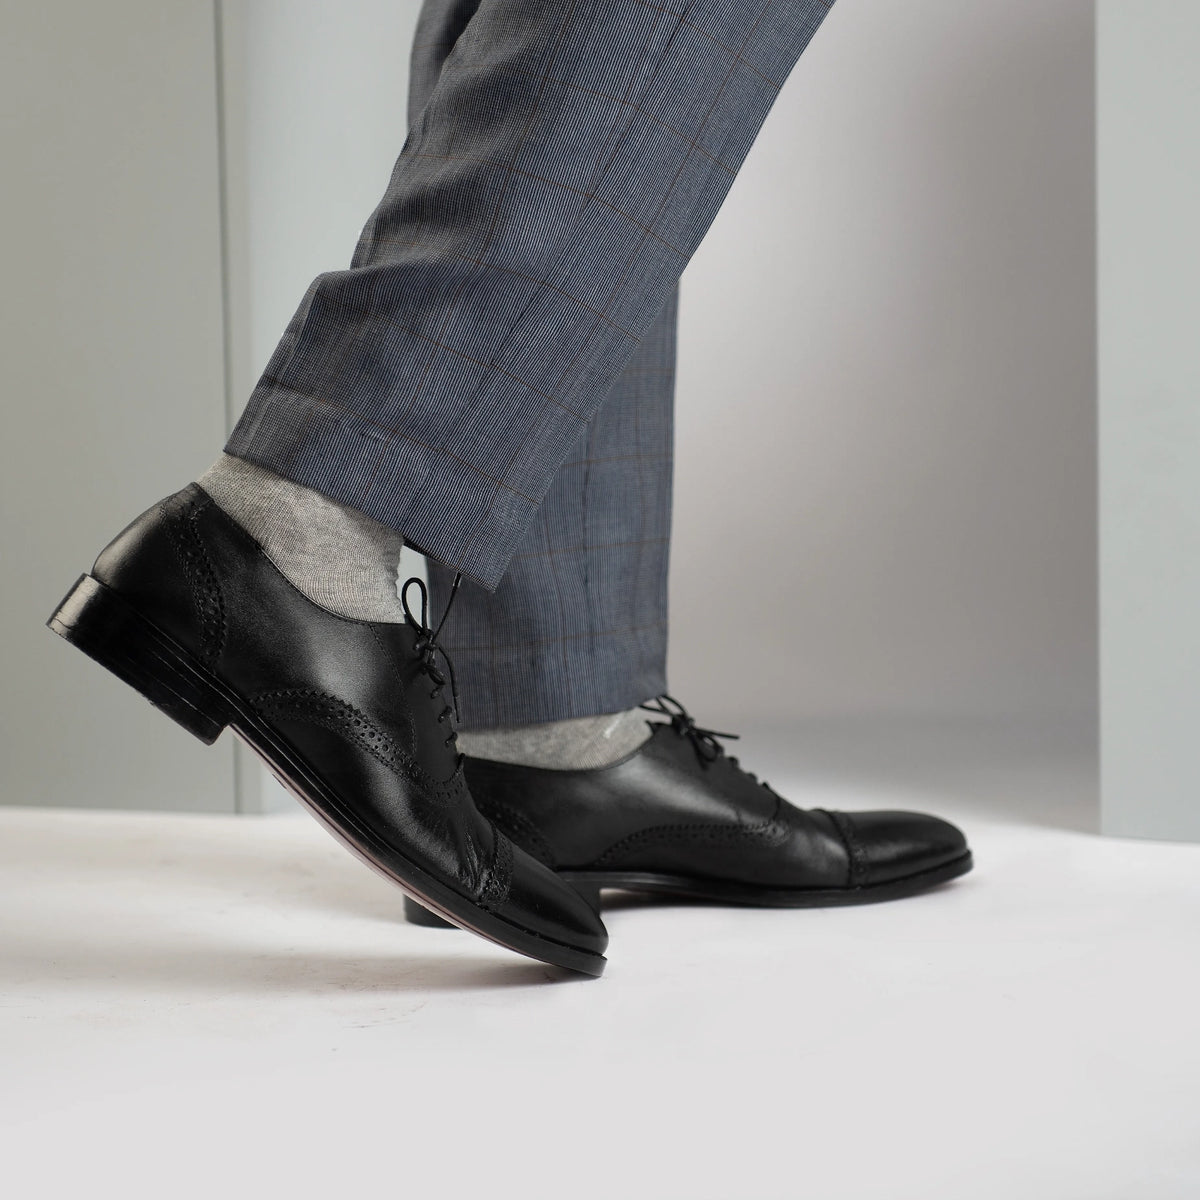 Greyson Brogues Oxford Black Leather Shoes